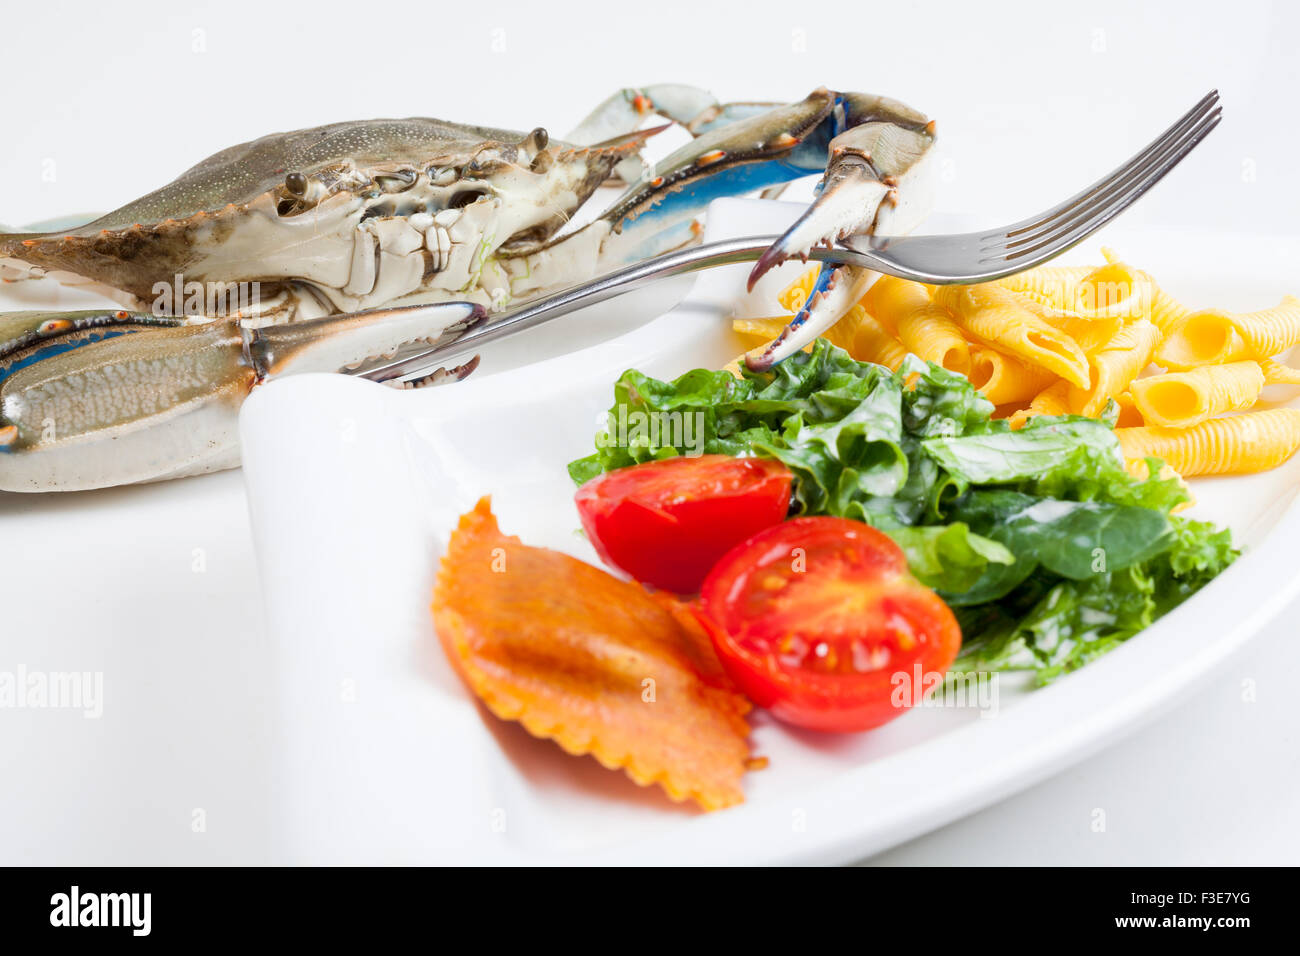 Blue crab ready to eat a meal Stock Photo